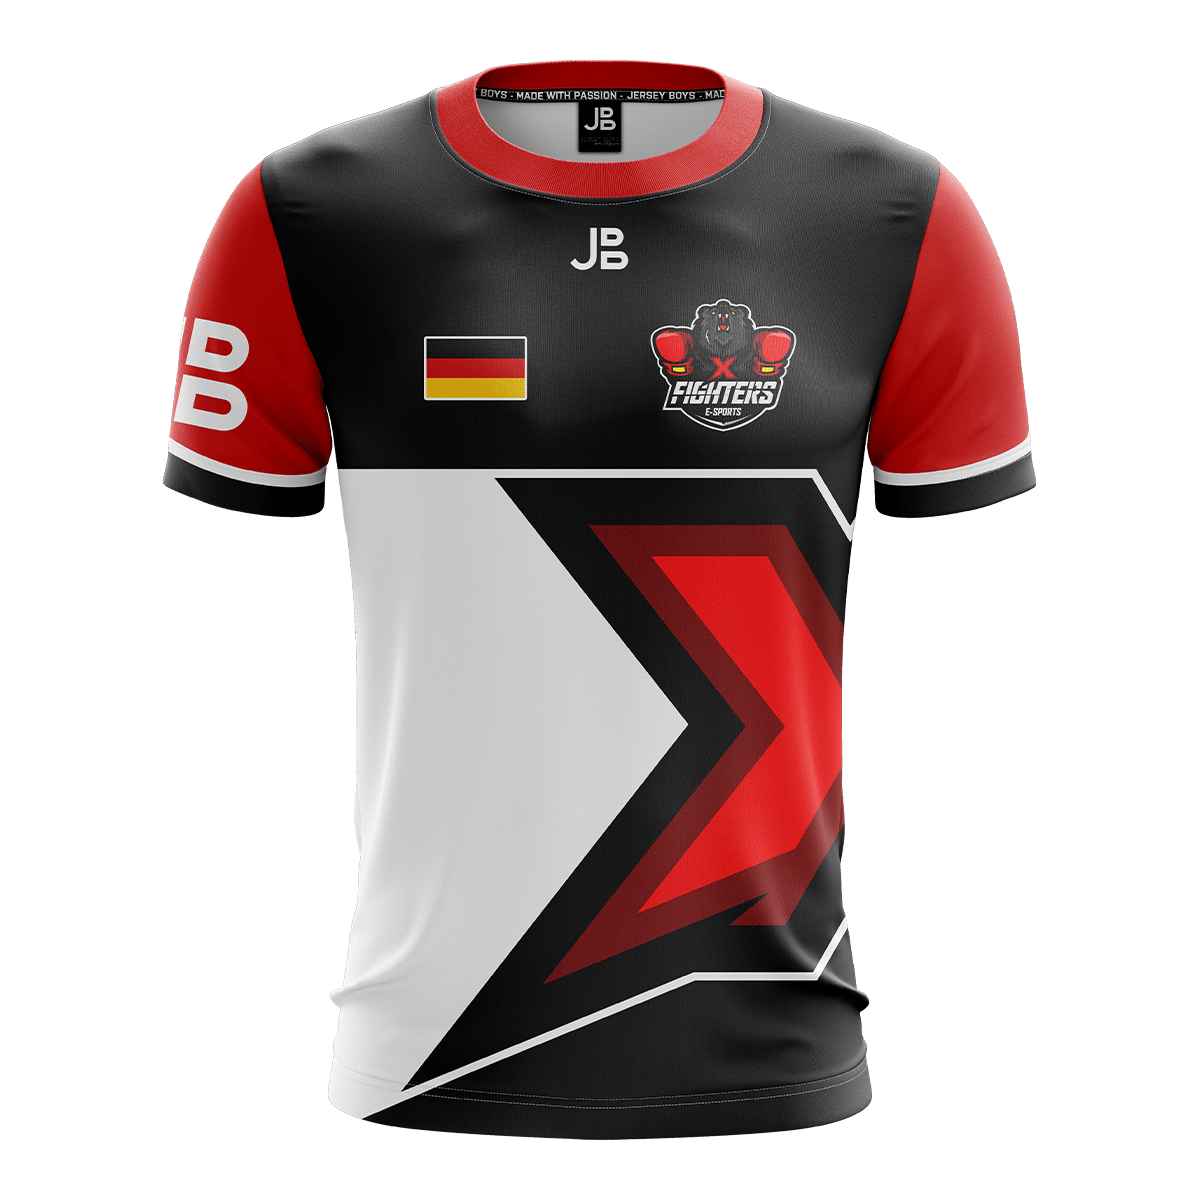 XFIGHTERS - Jersey 2020